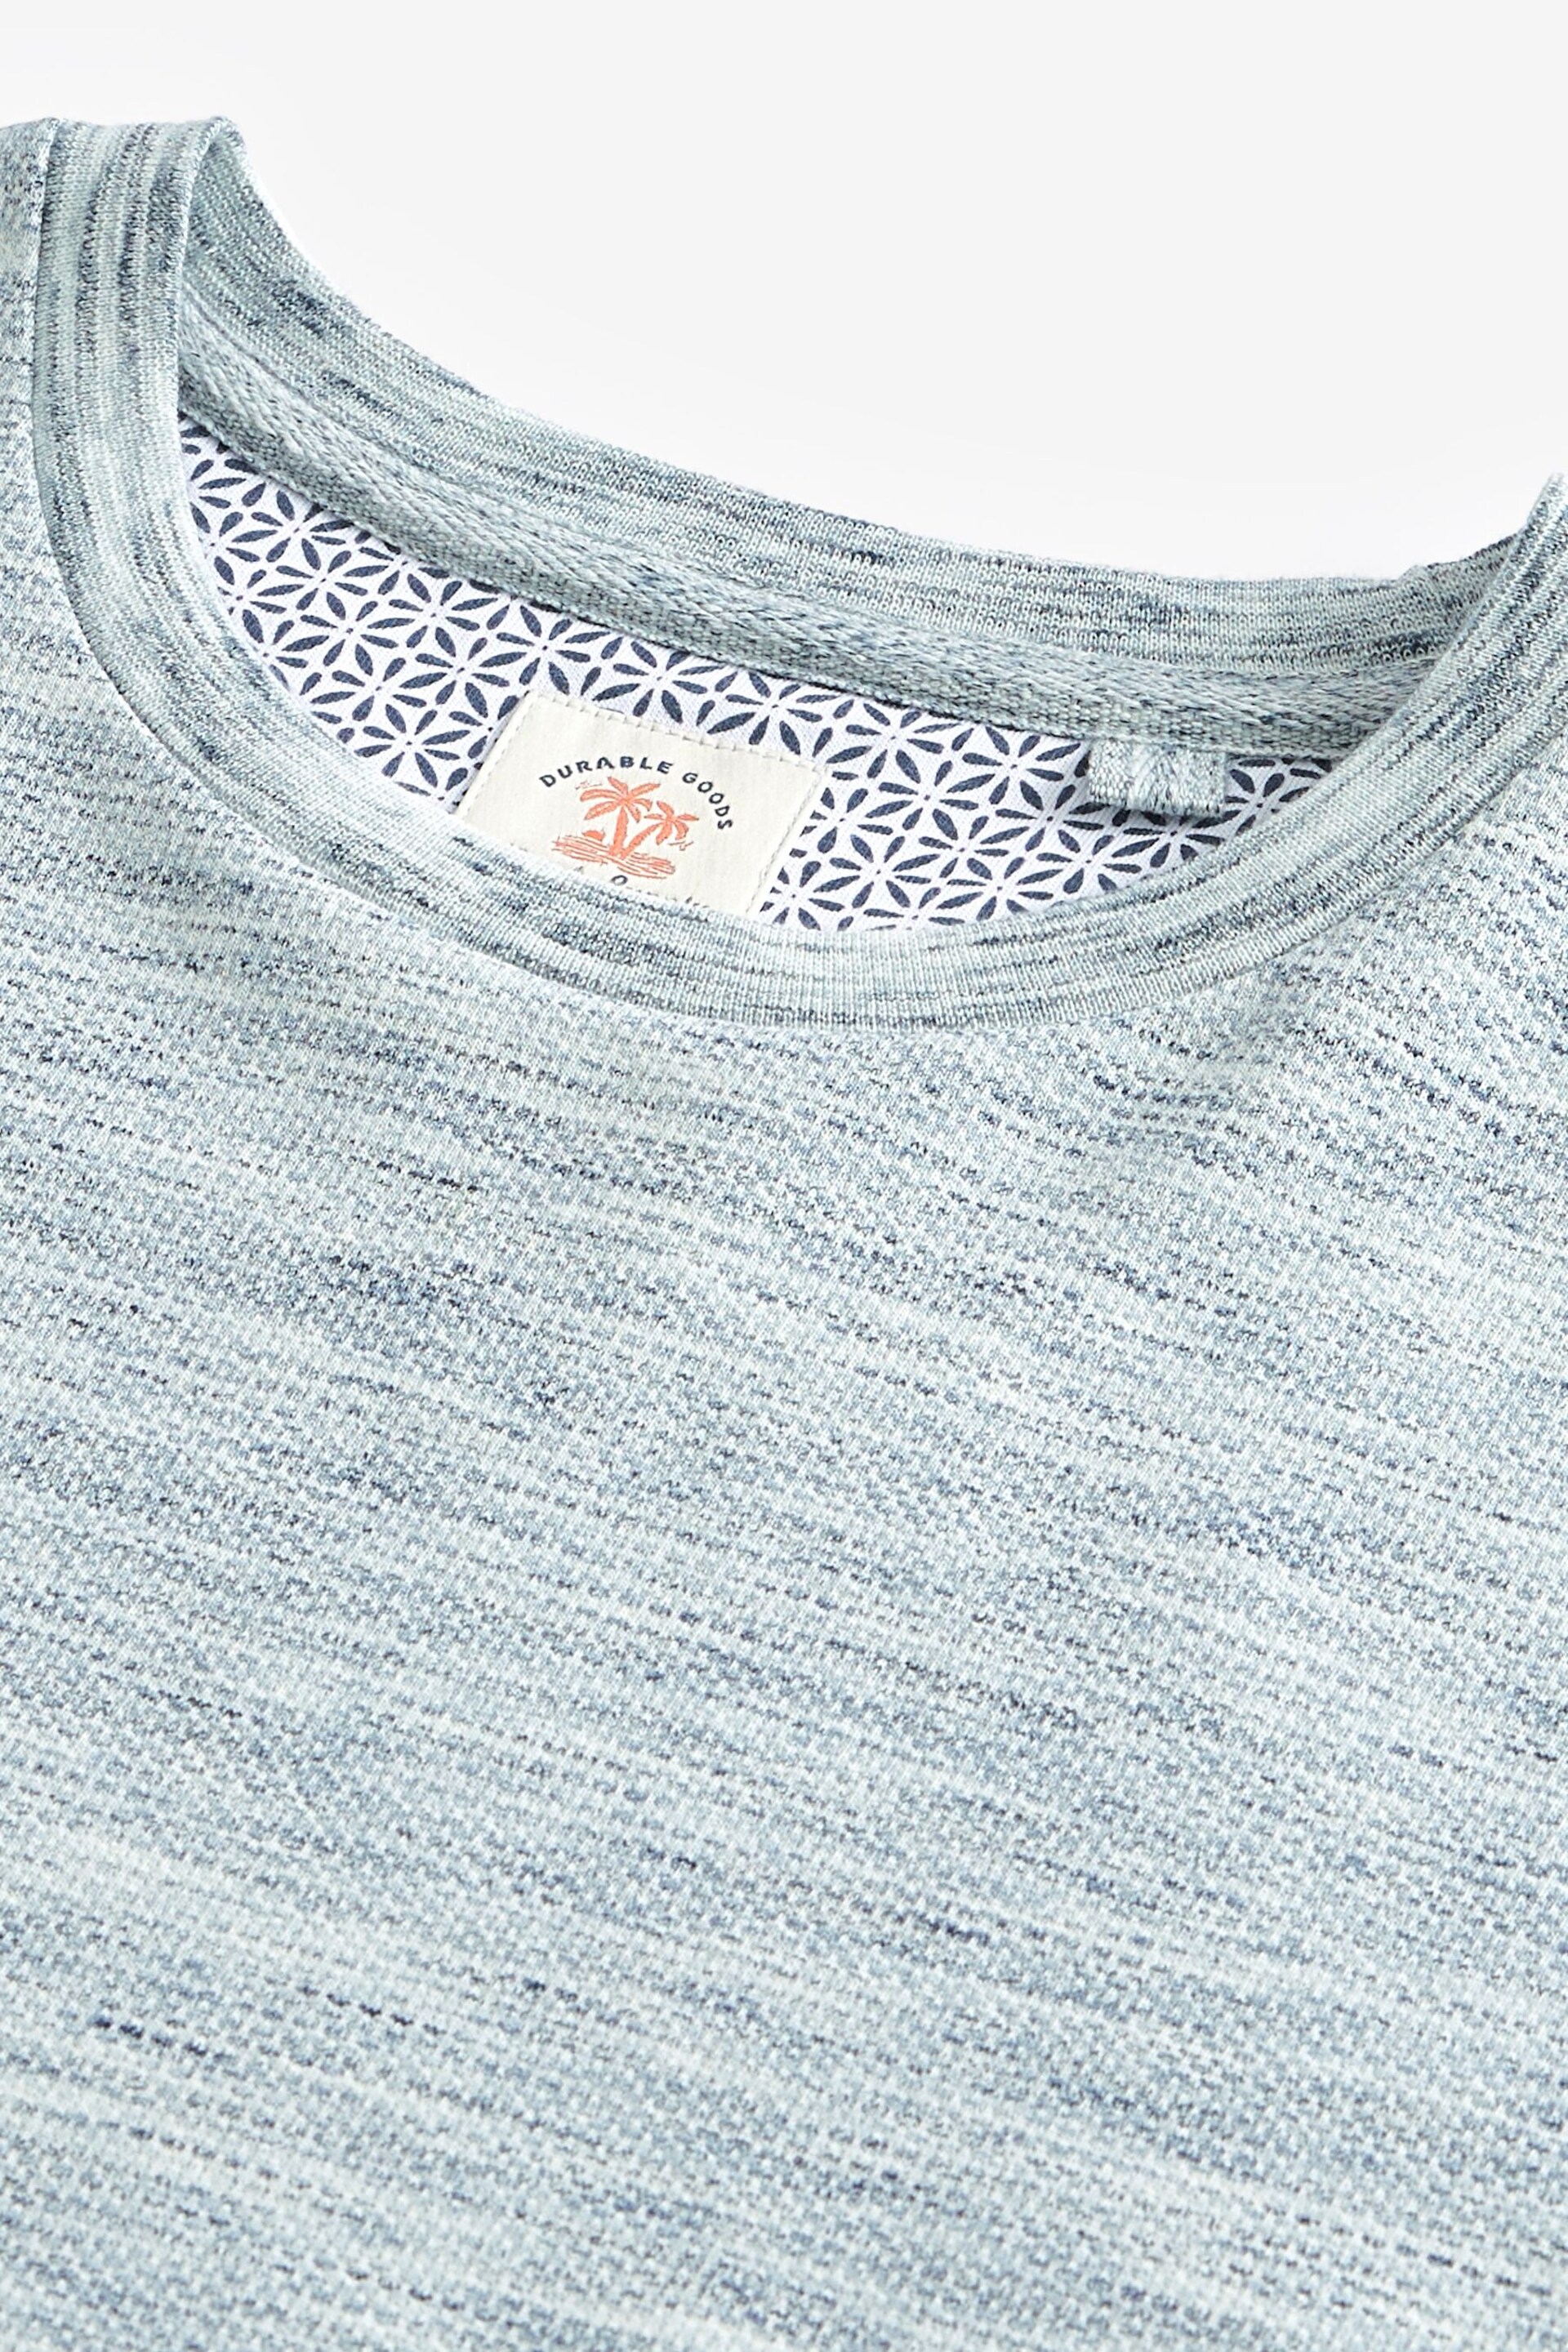 Blue Marl Textured T-Shirt - Image 7 of 7